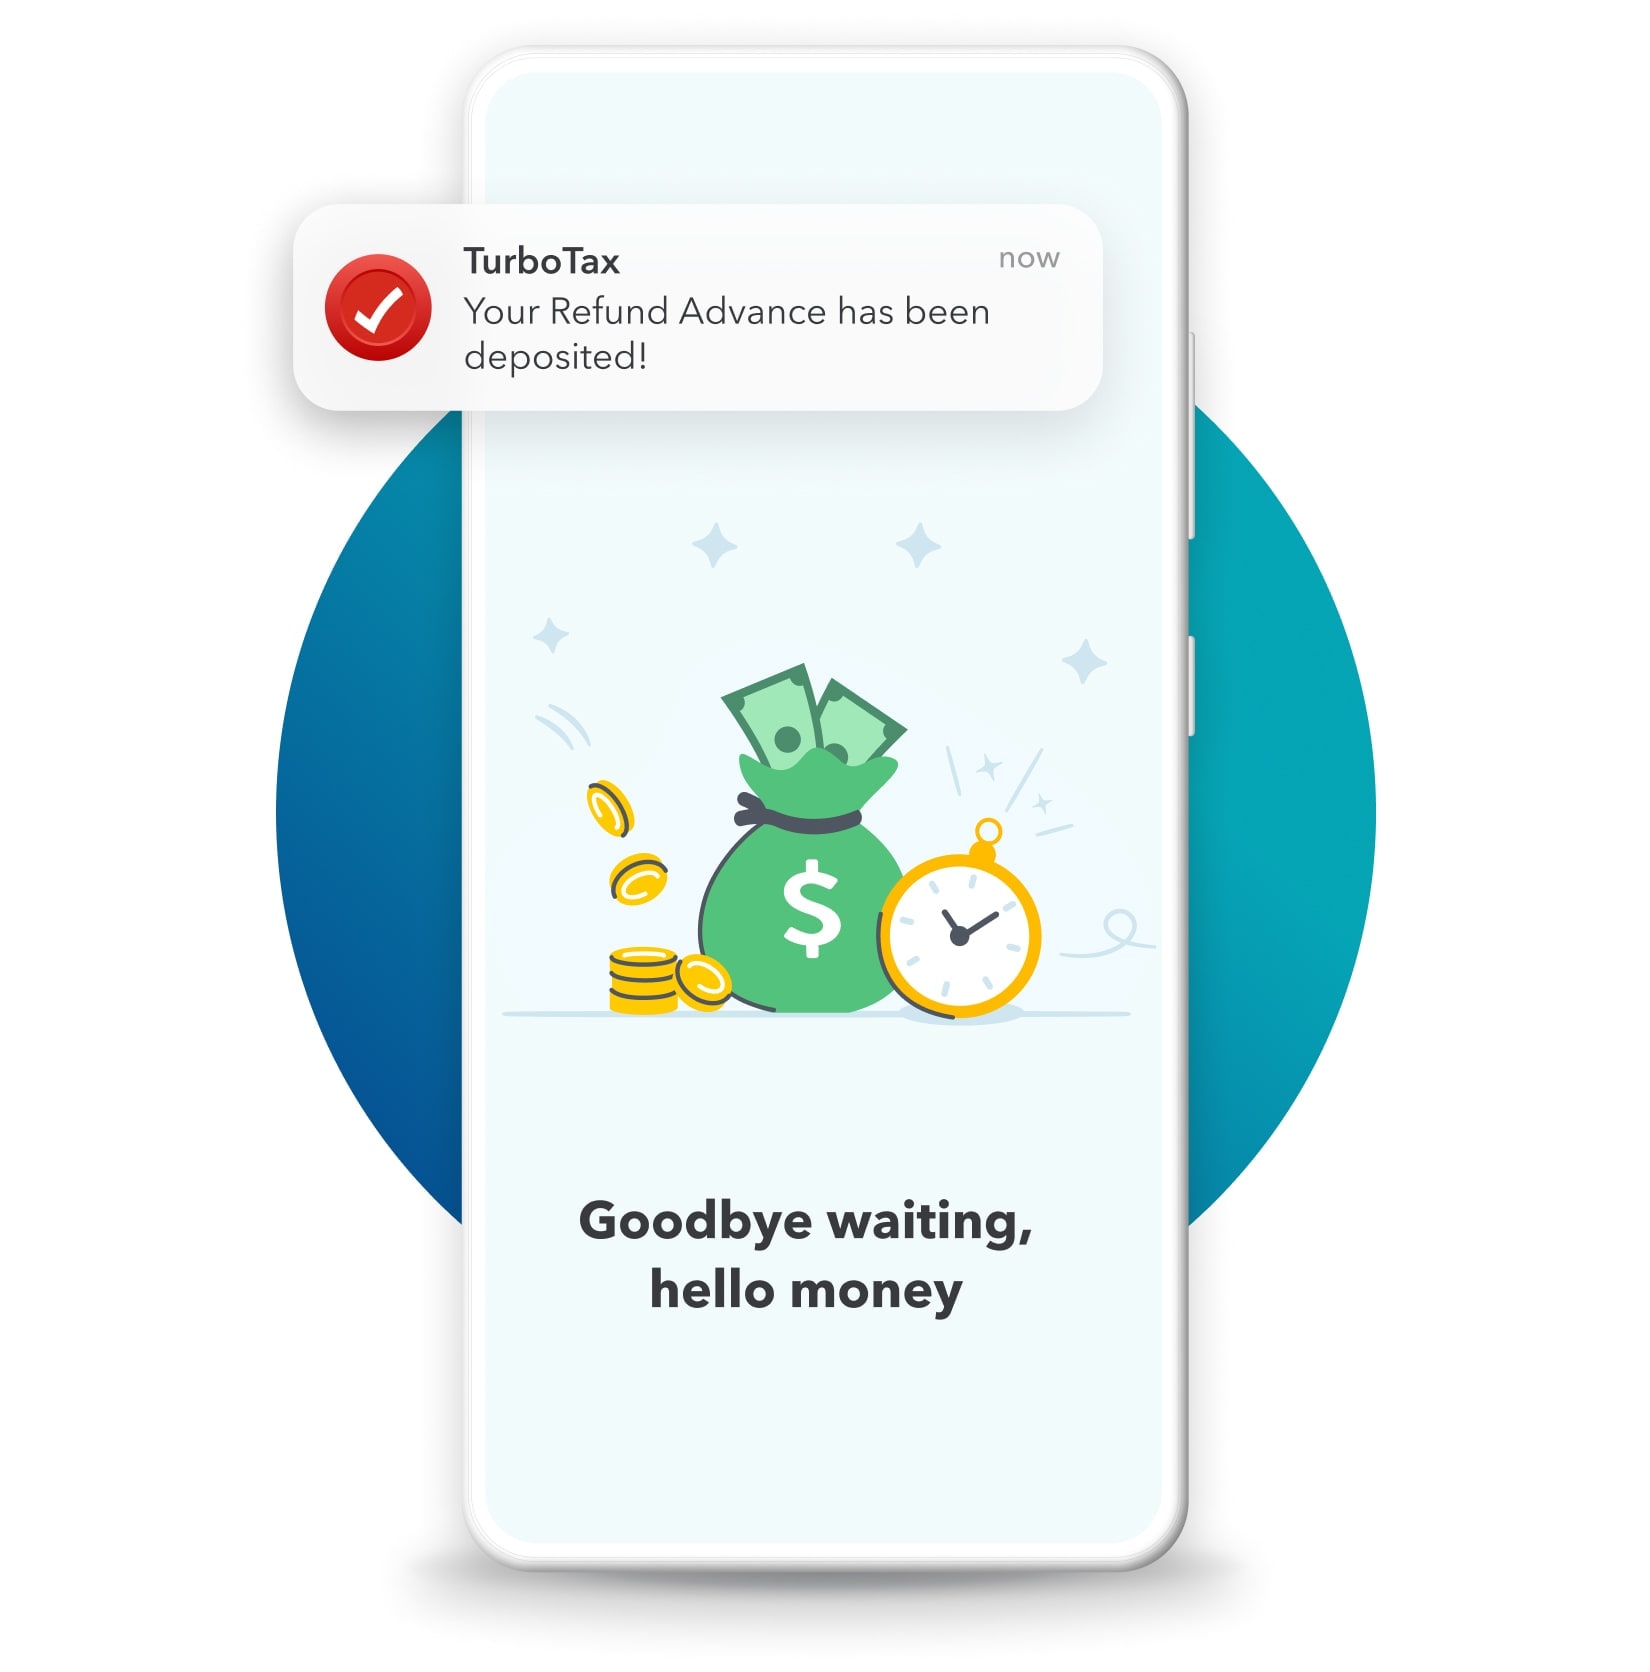 Tax Refund Advance Get Up to 4,000 TurboTax® Official